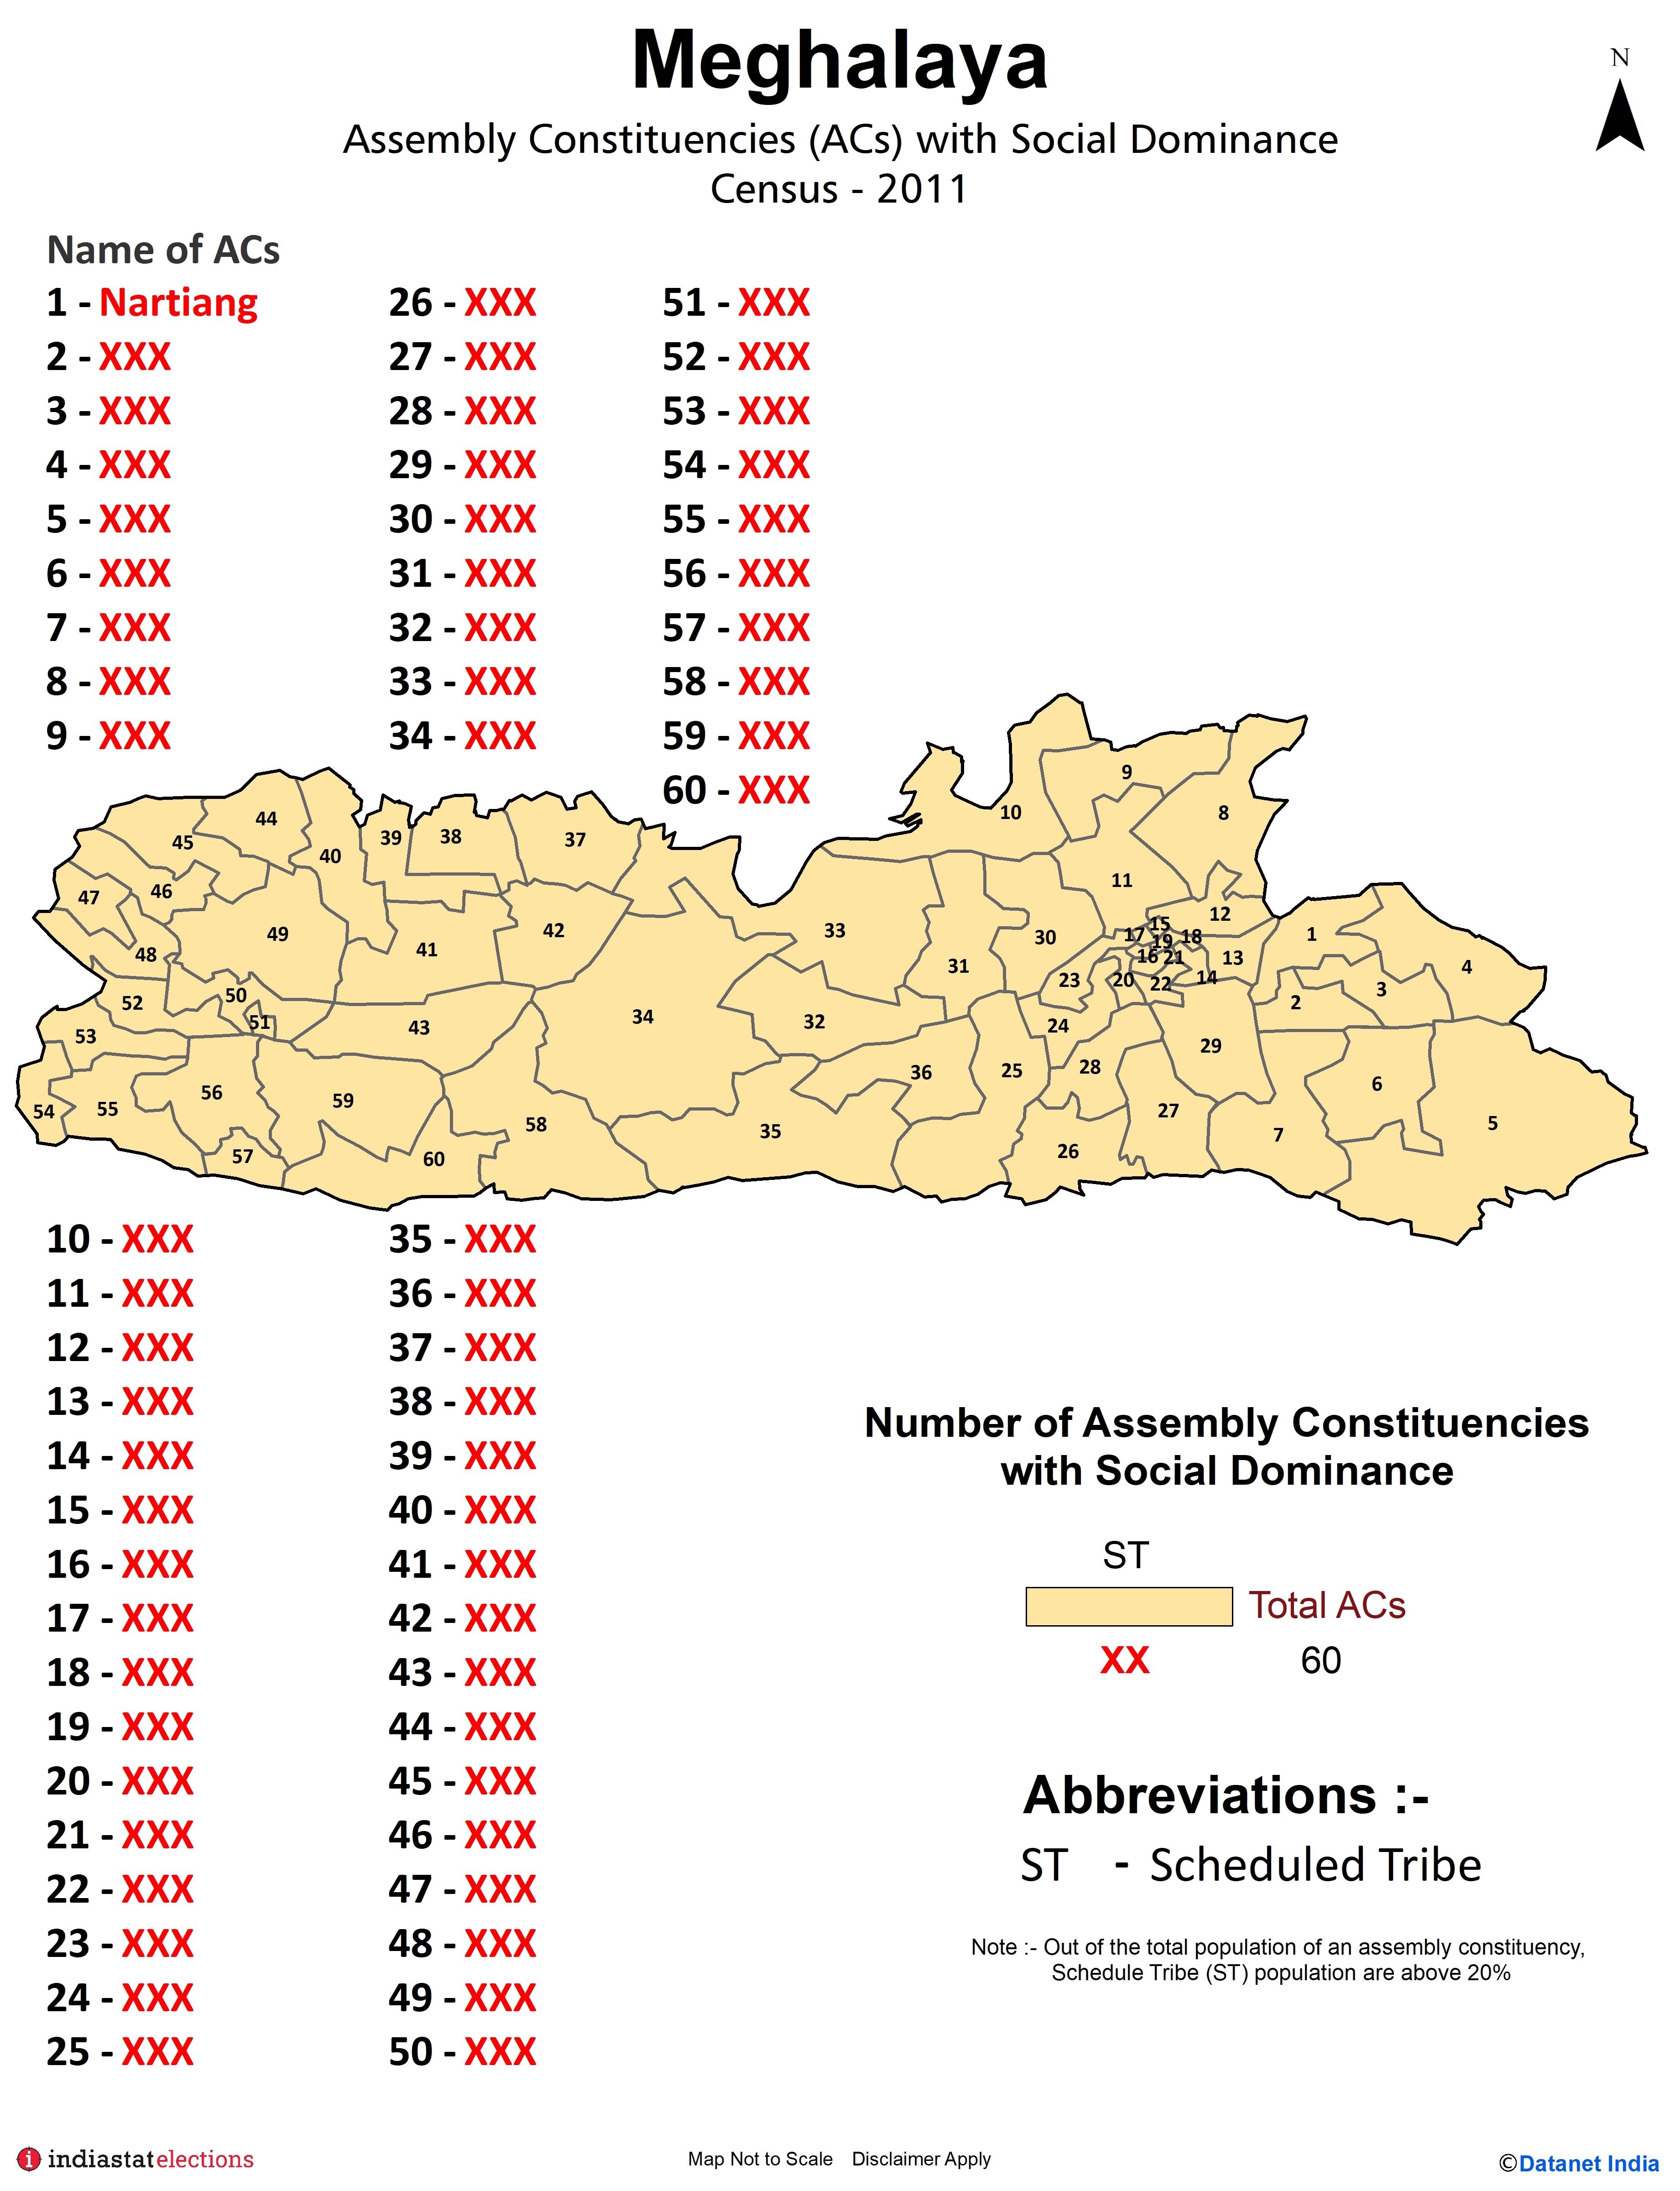 Assembly Constituencies with Social Dominance in Meghalaya - Census 2011